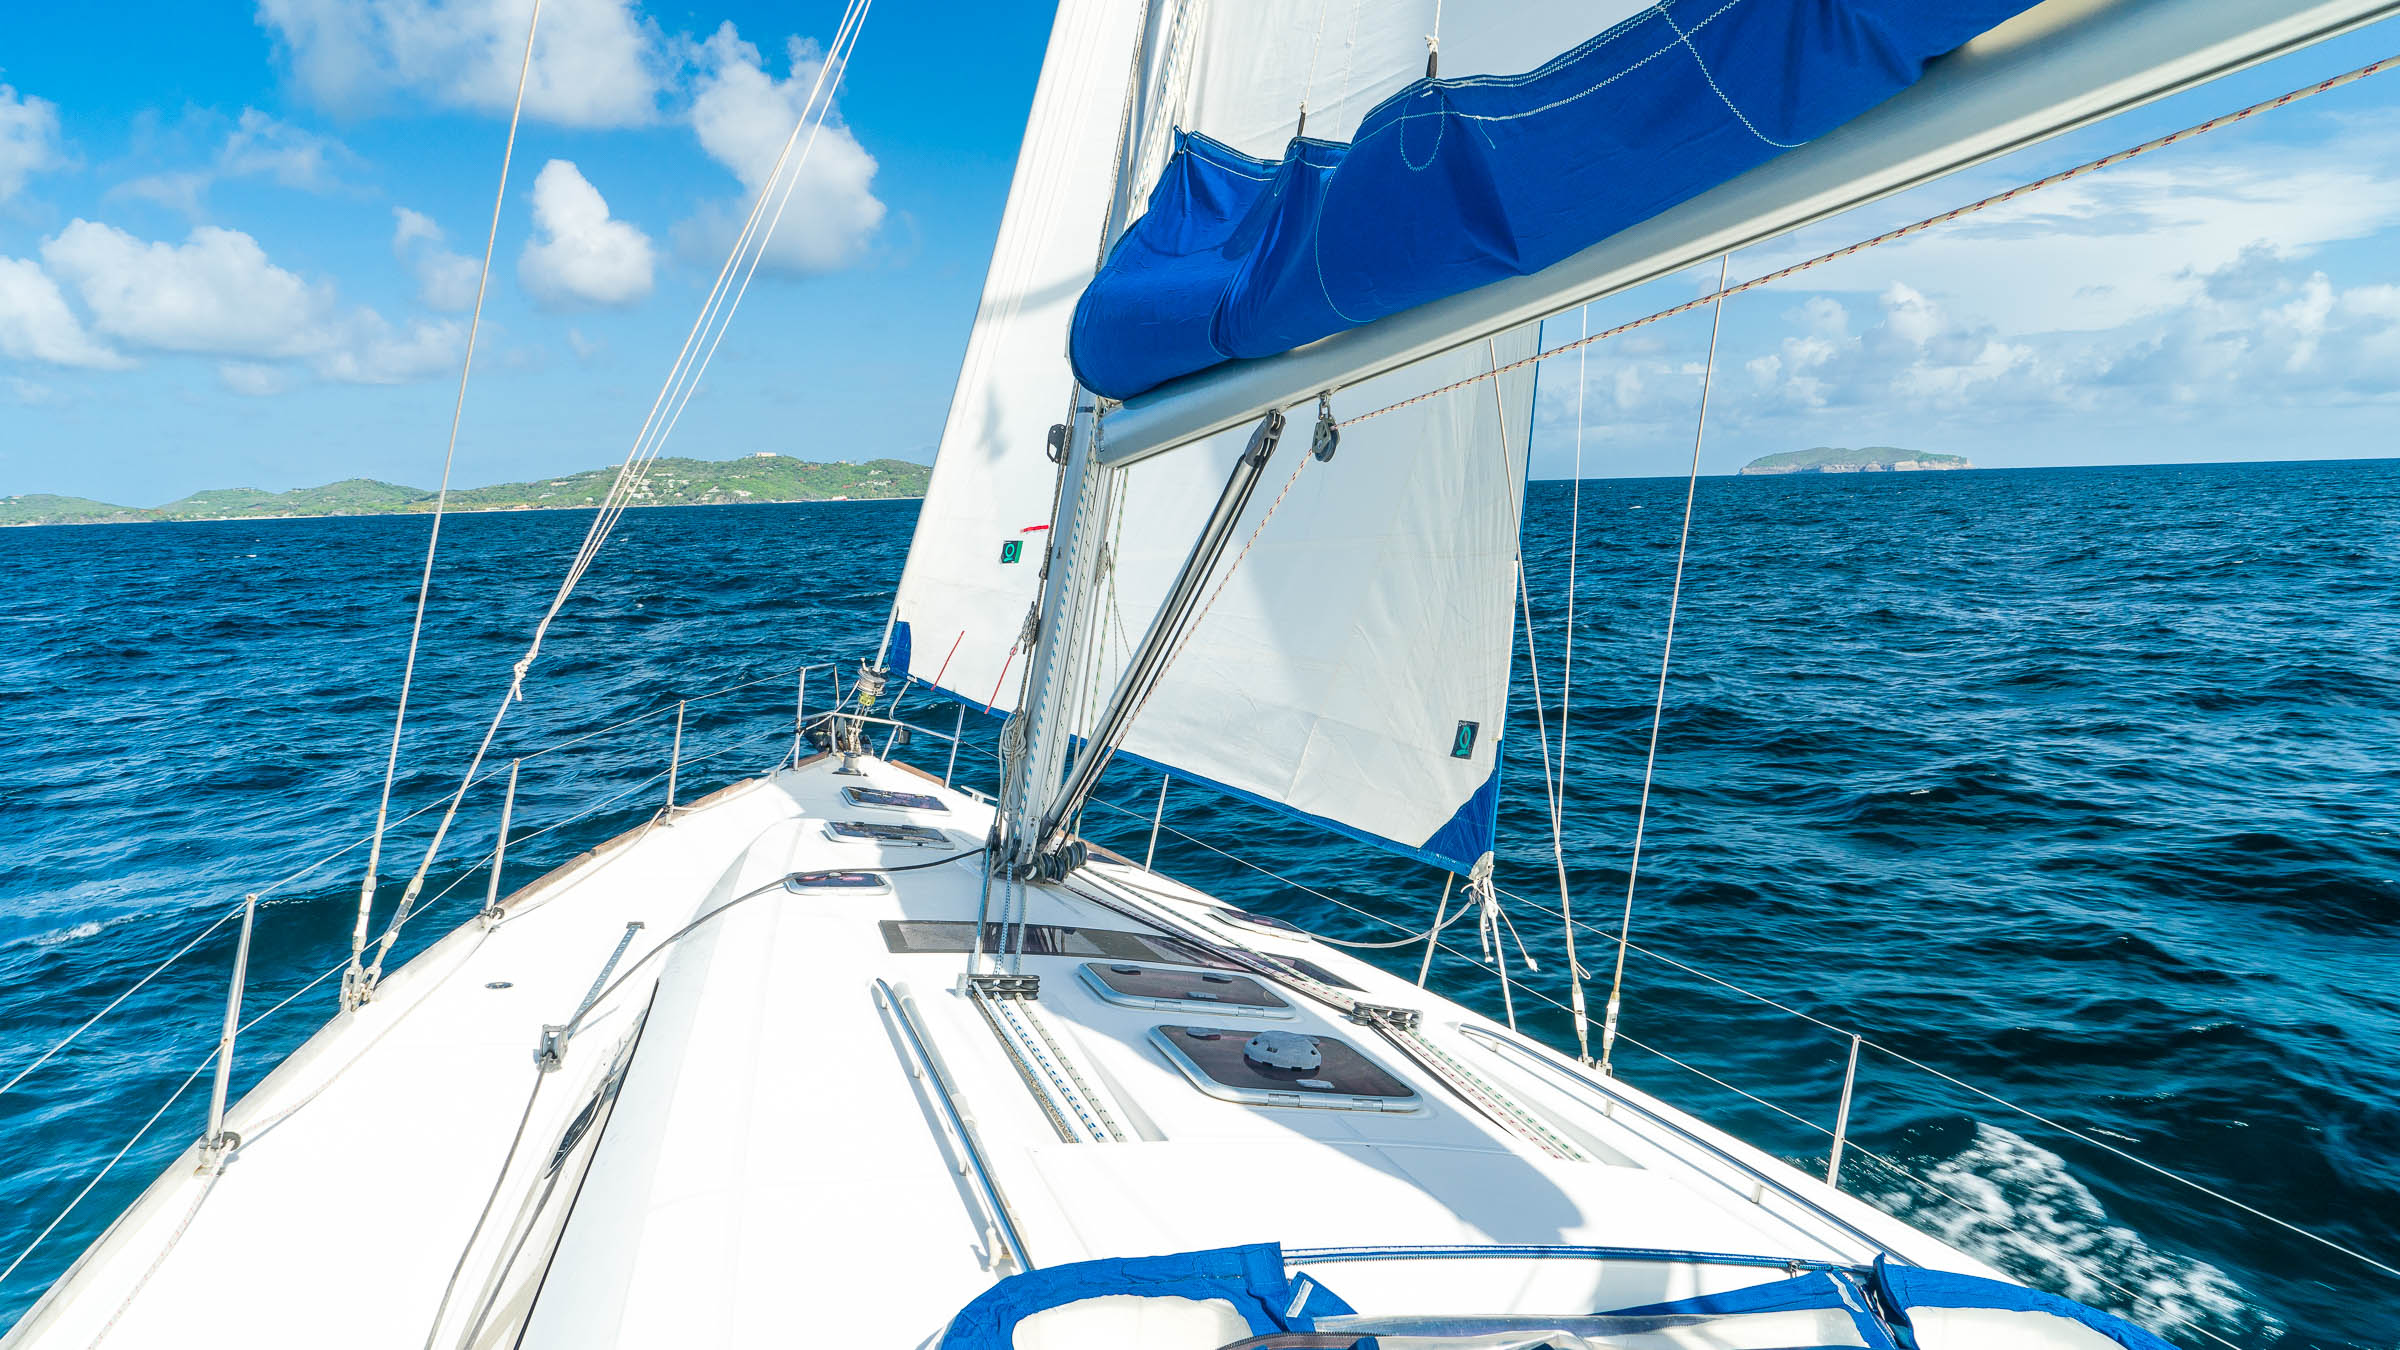 learning to sail in the grenadines by Patrick Bennett